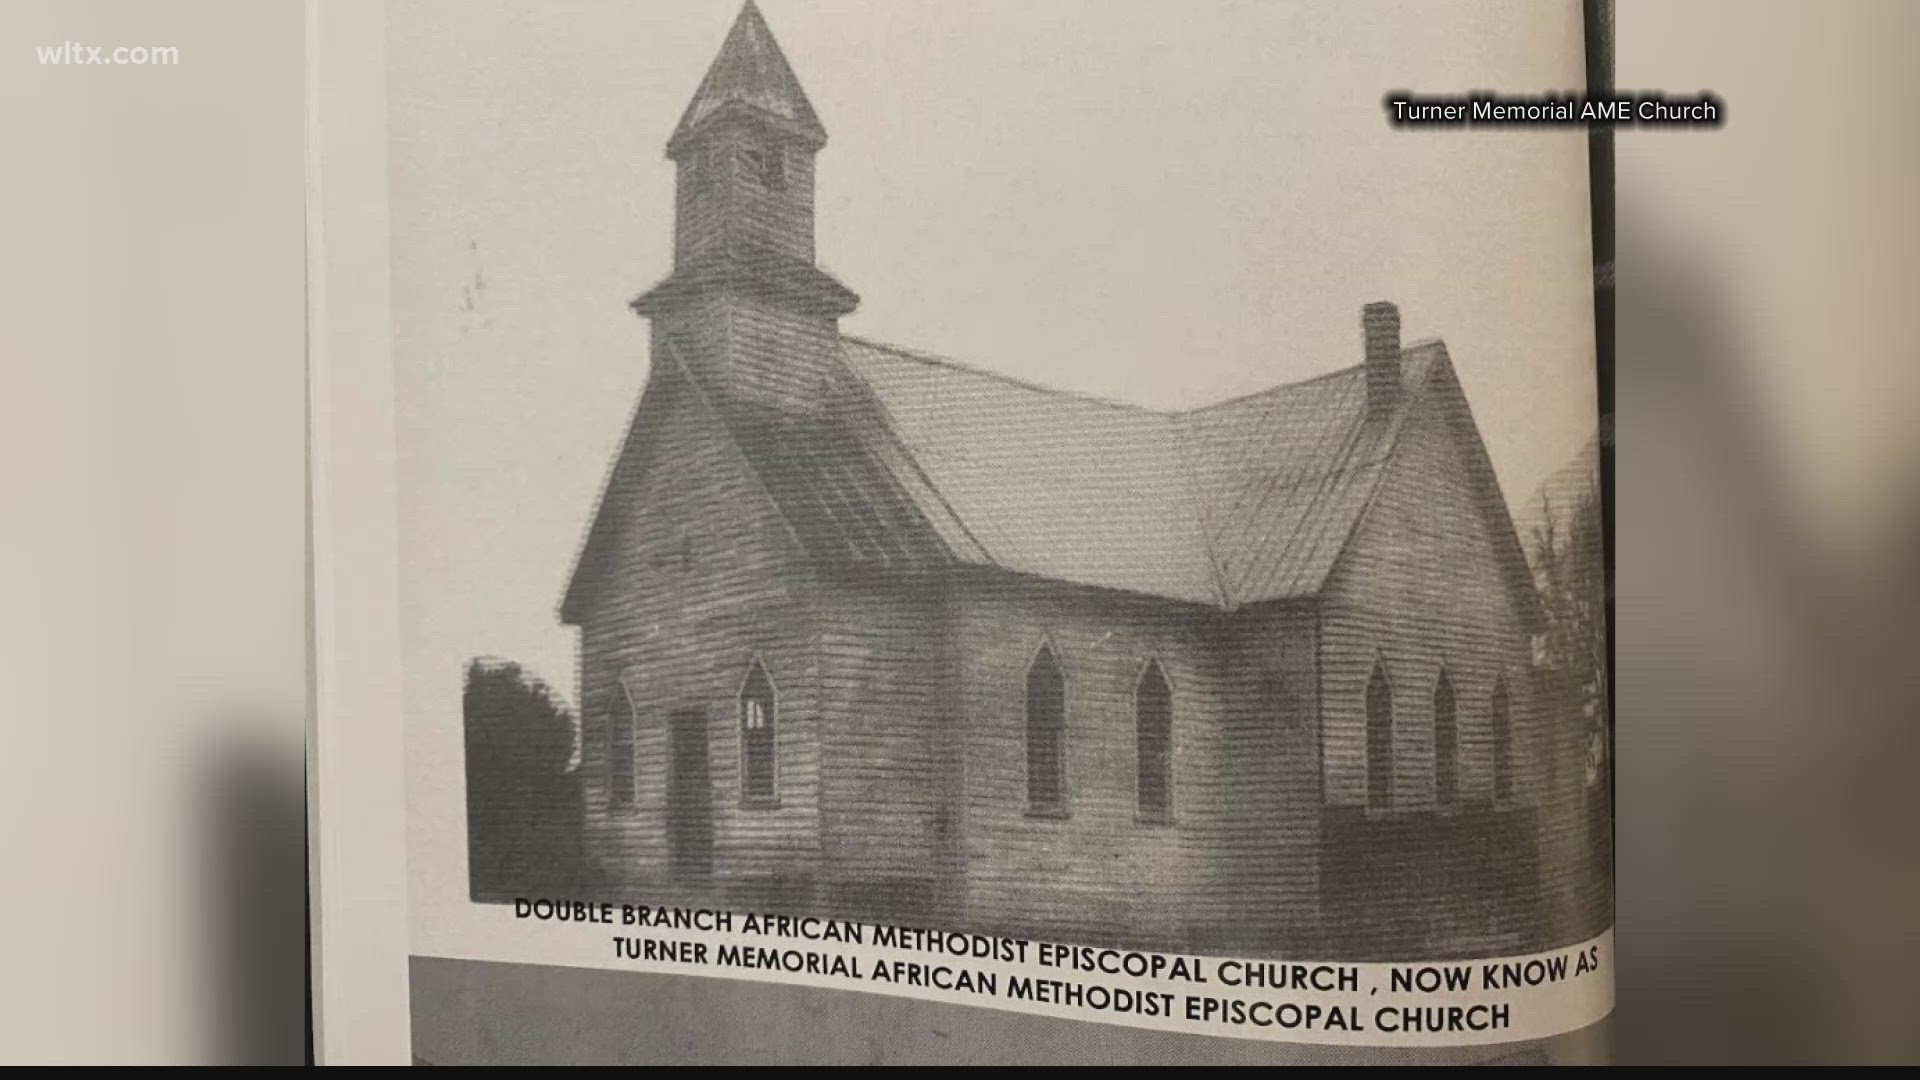 From an underground slave church to a staple in the West Columbia community, Turner Memorial AME Church has grown through the best and worst parts of history.